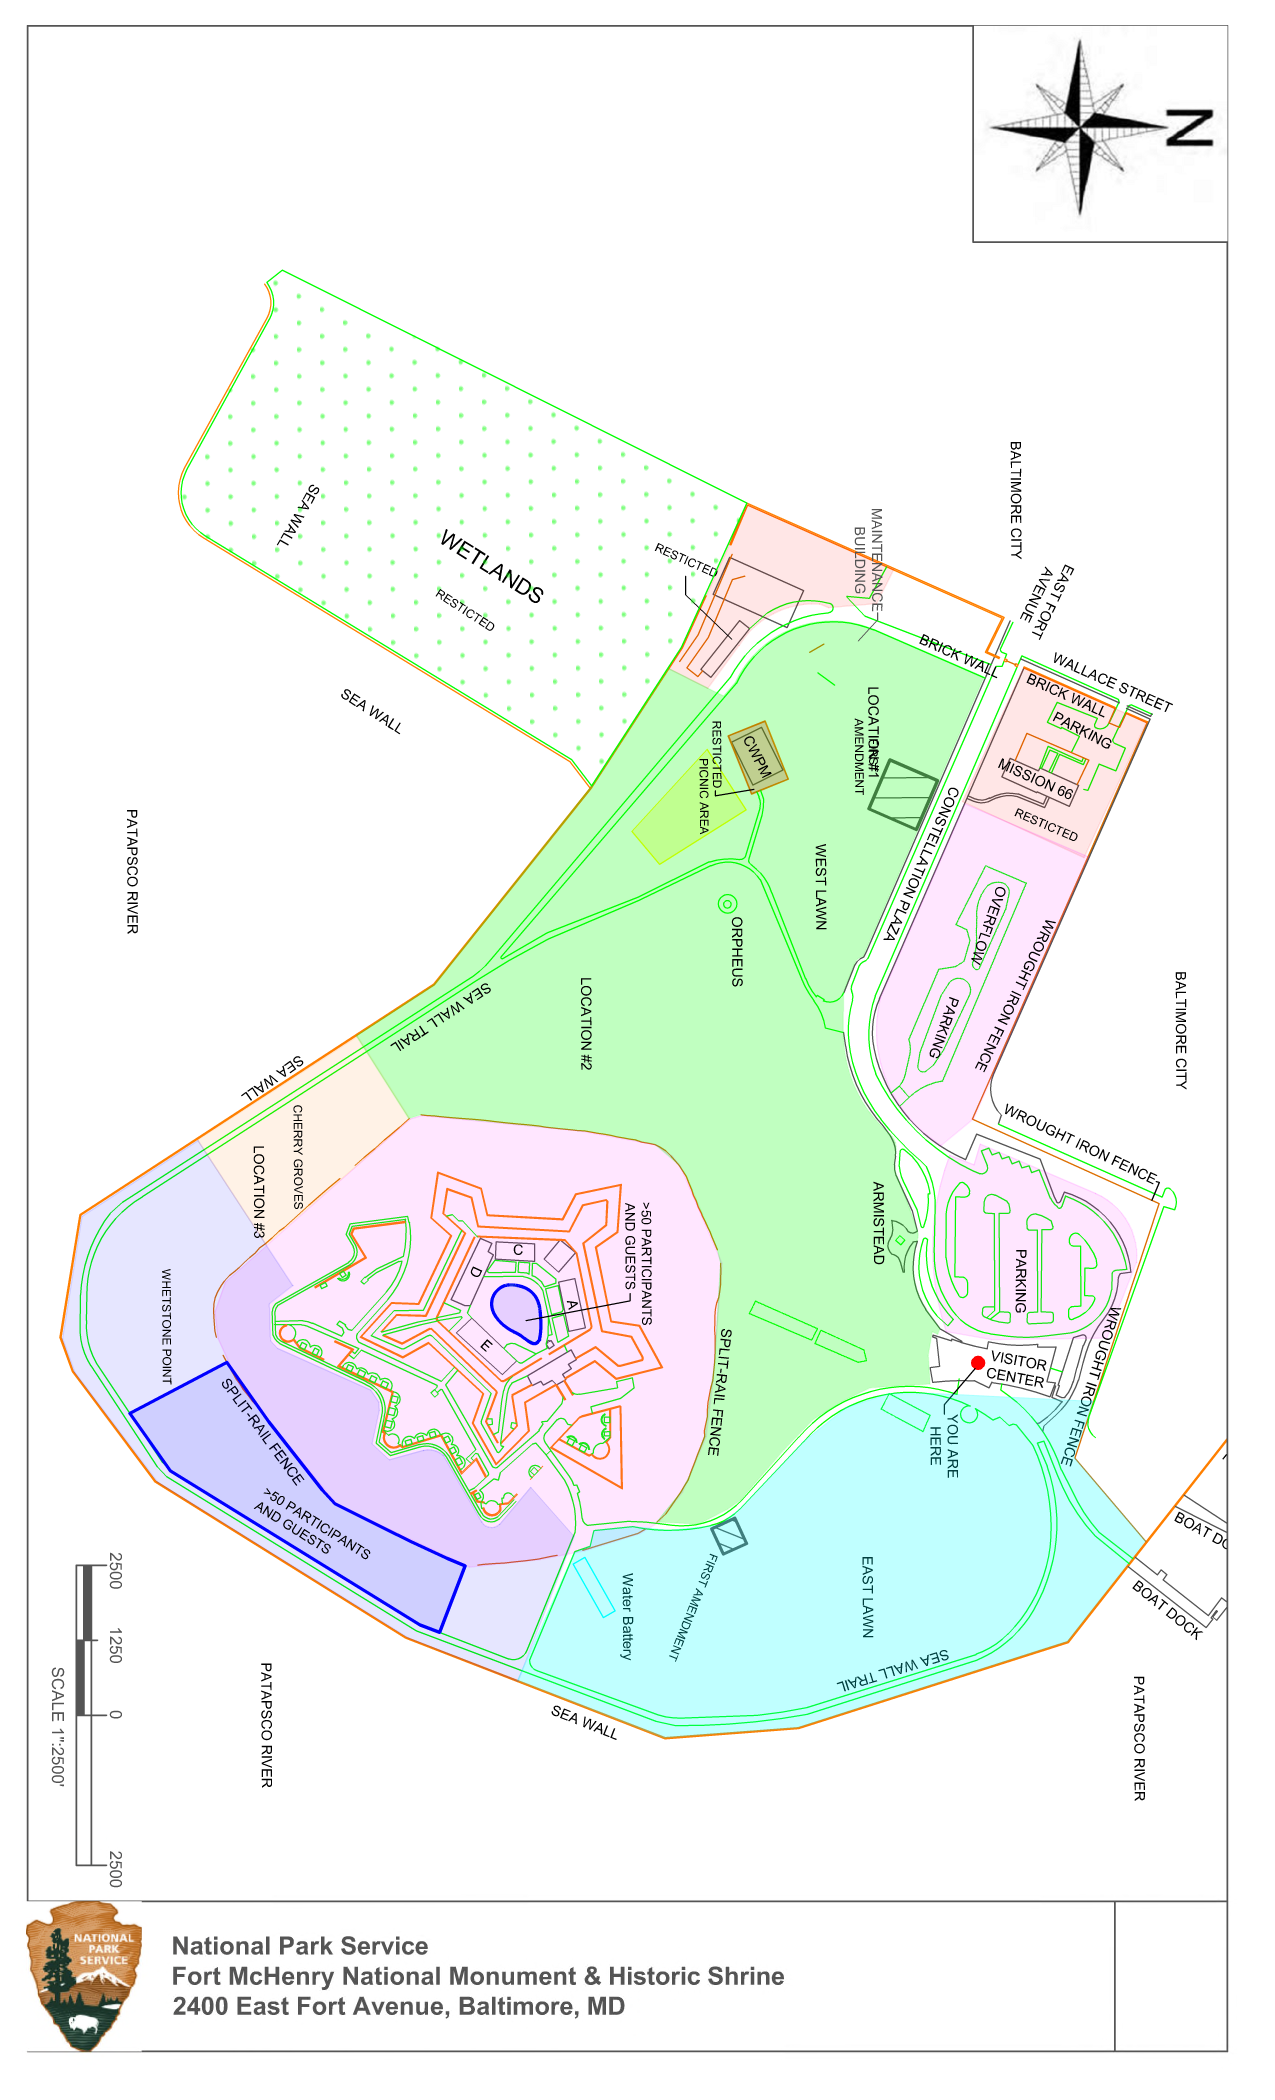 A map of Fort McHenry showing various zones where various activities can and cannot take place.